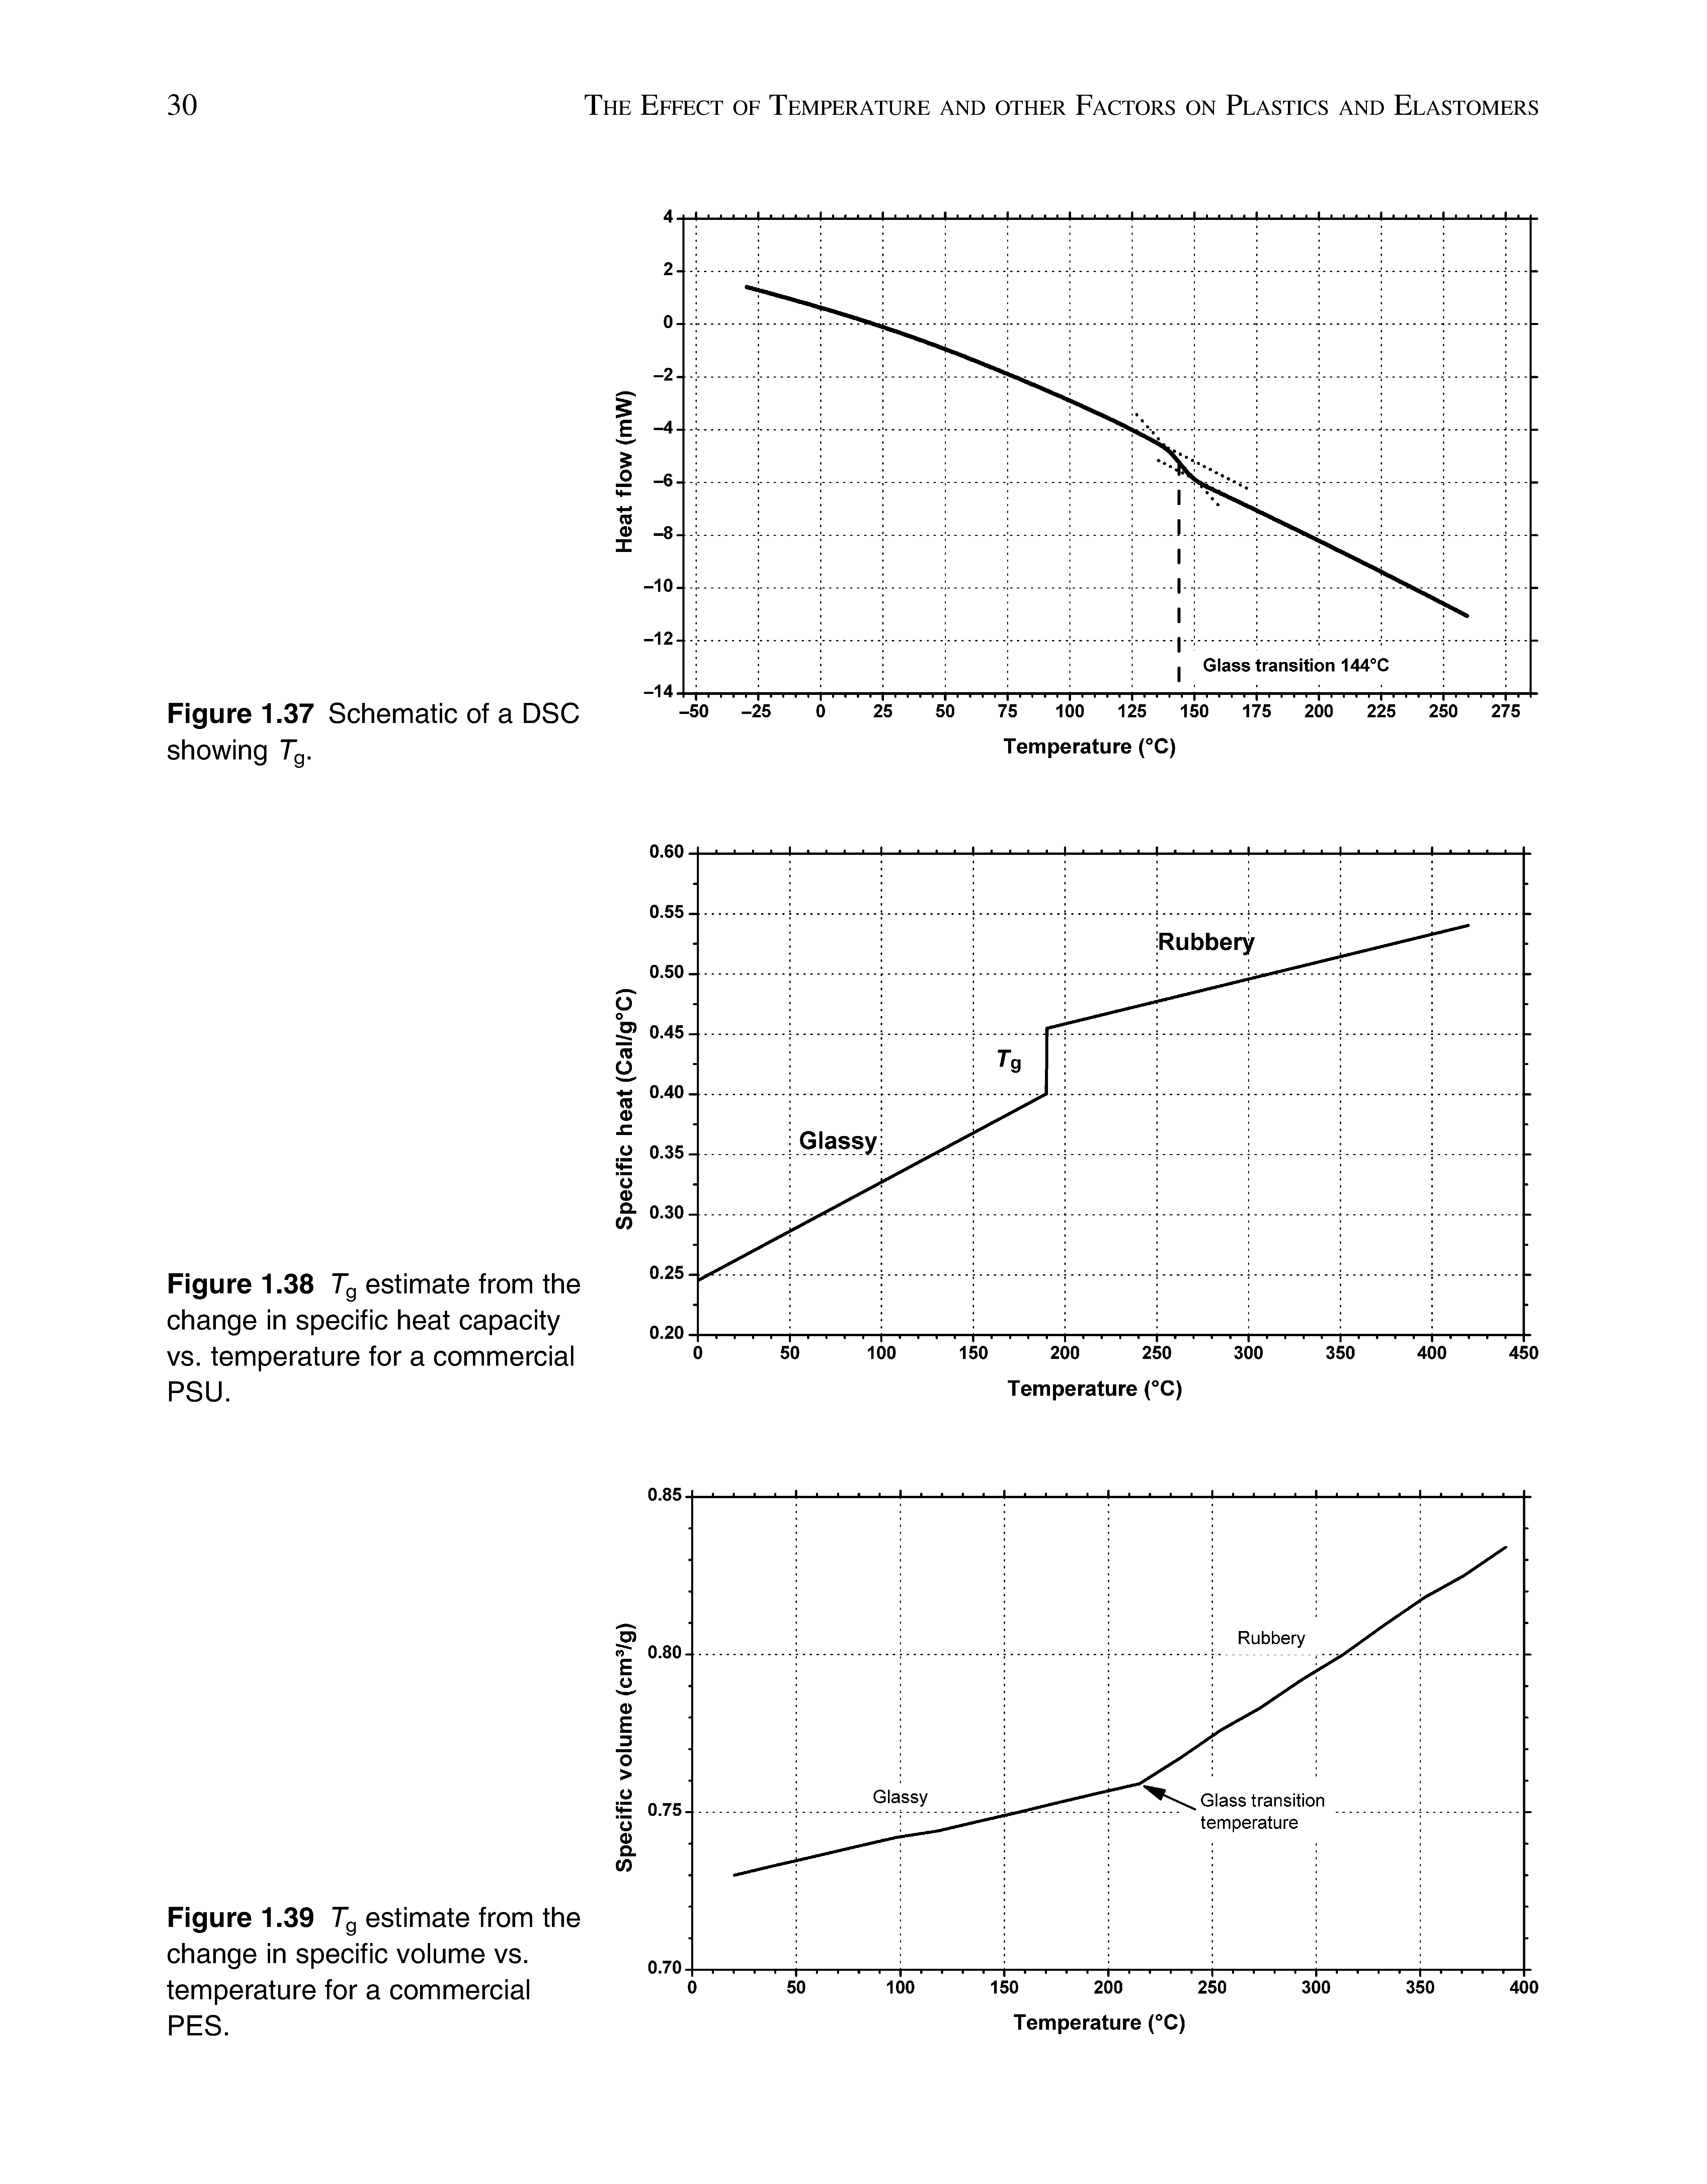 Figure 1.39 Tg estimate from the change in specific volume vs. temperature for a commercial PES.